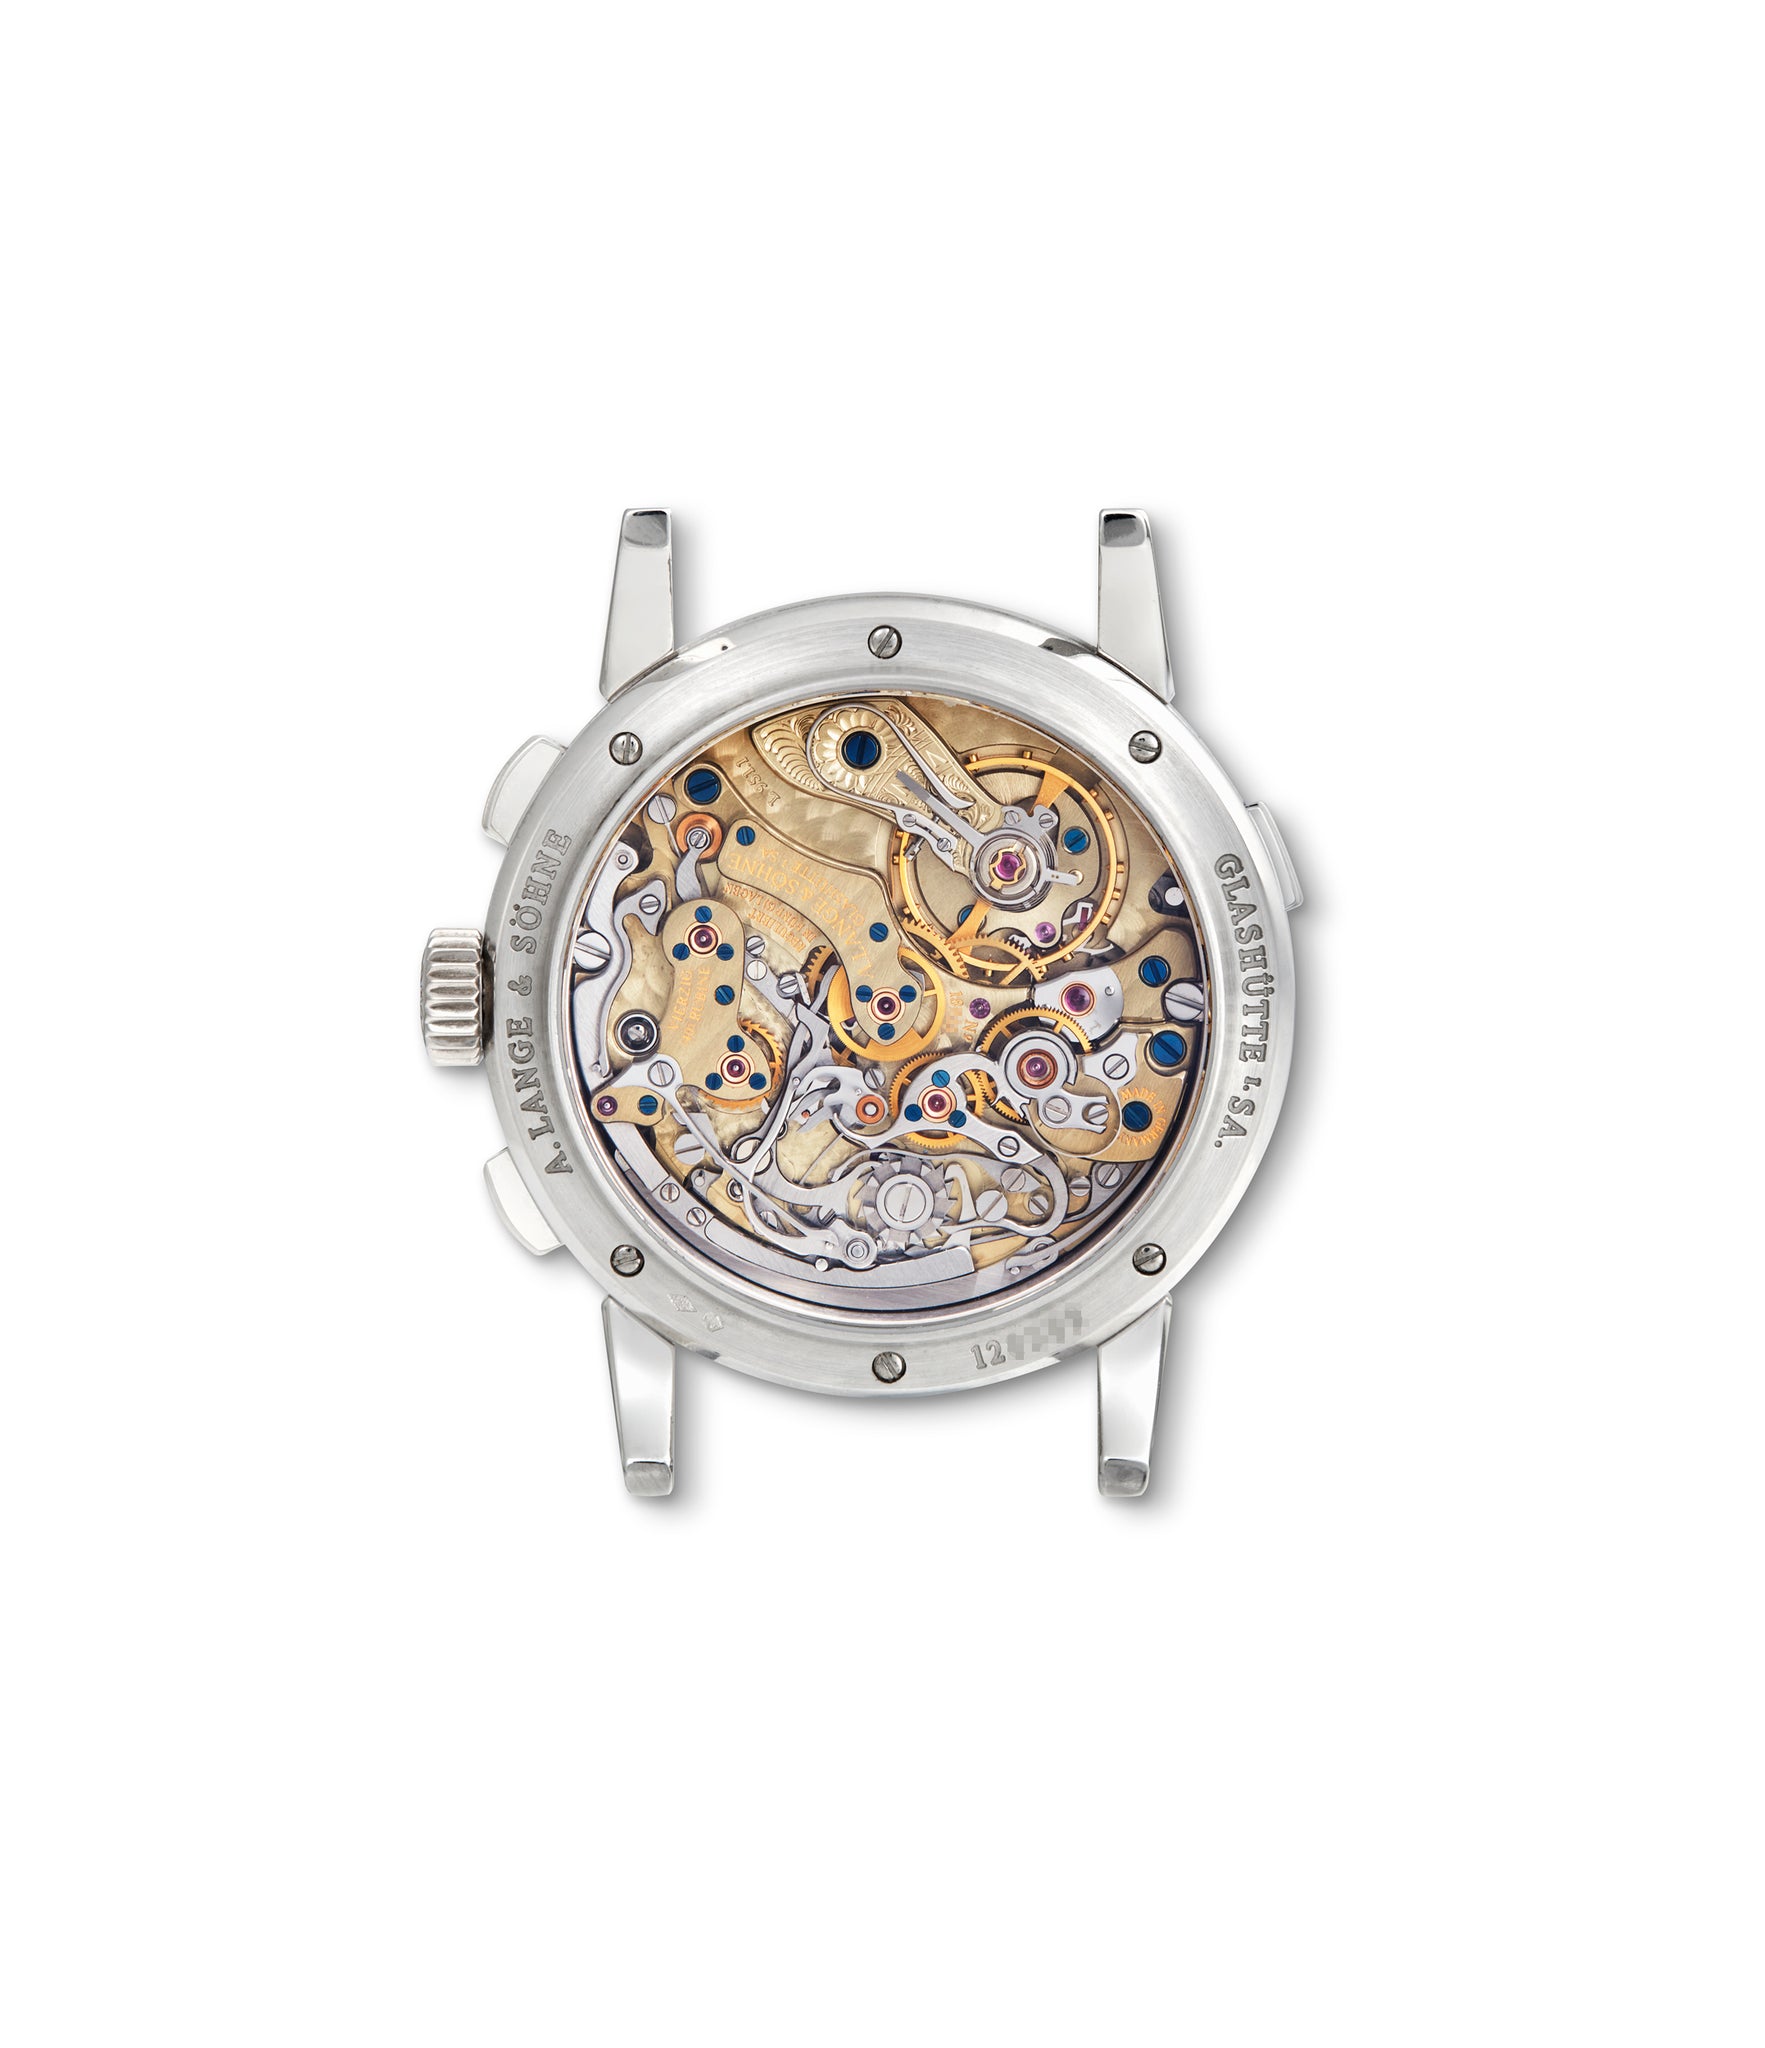 caseback A. Lange & Söhne Datograph 403.035 Platinum preowned watch at A Collected Man London